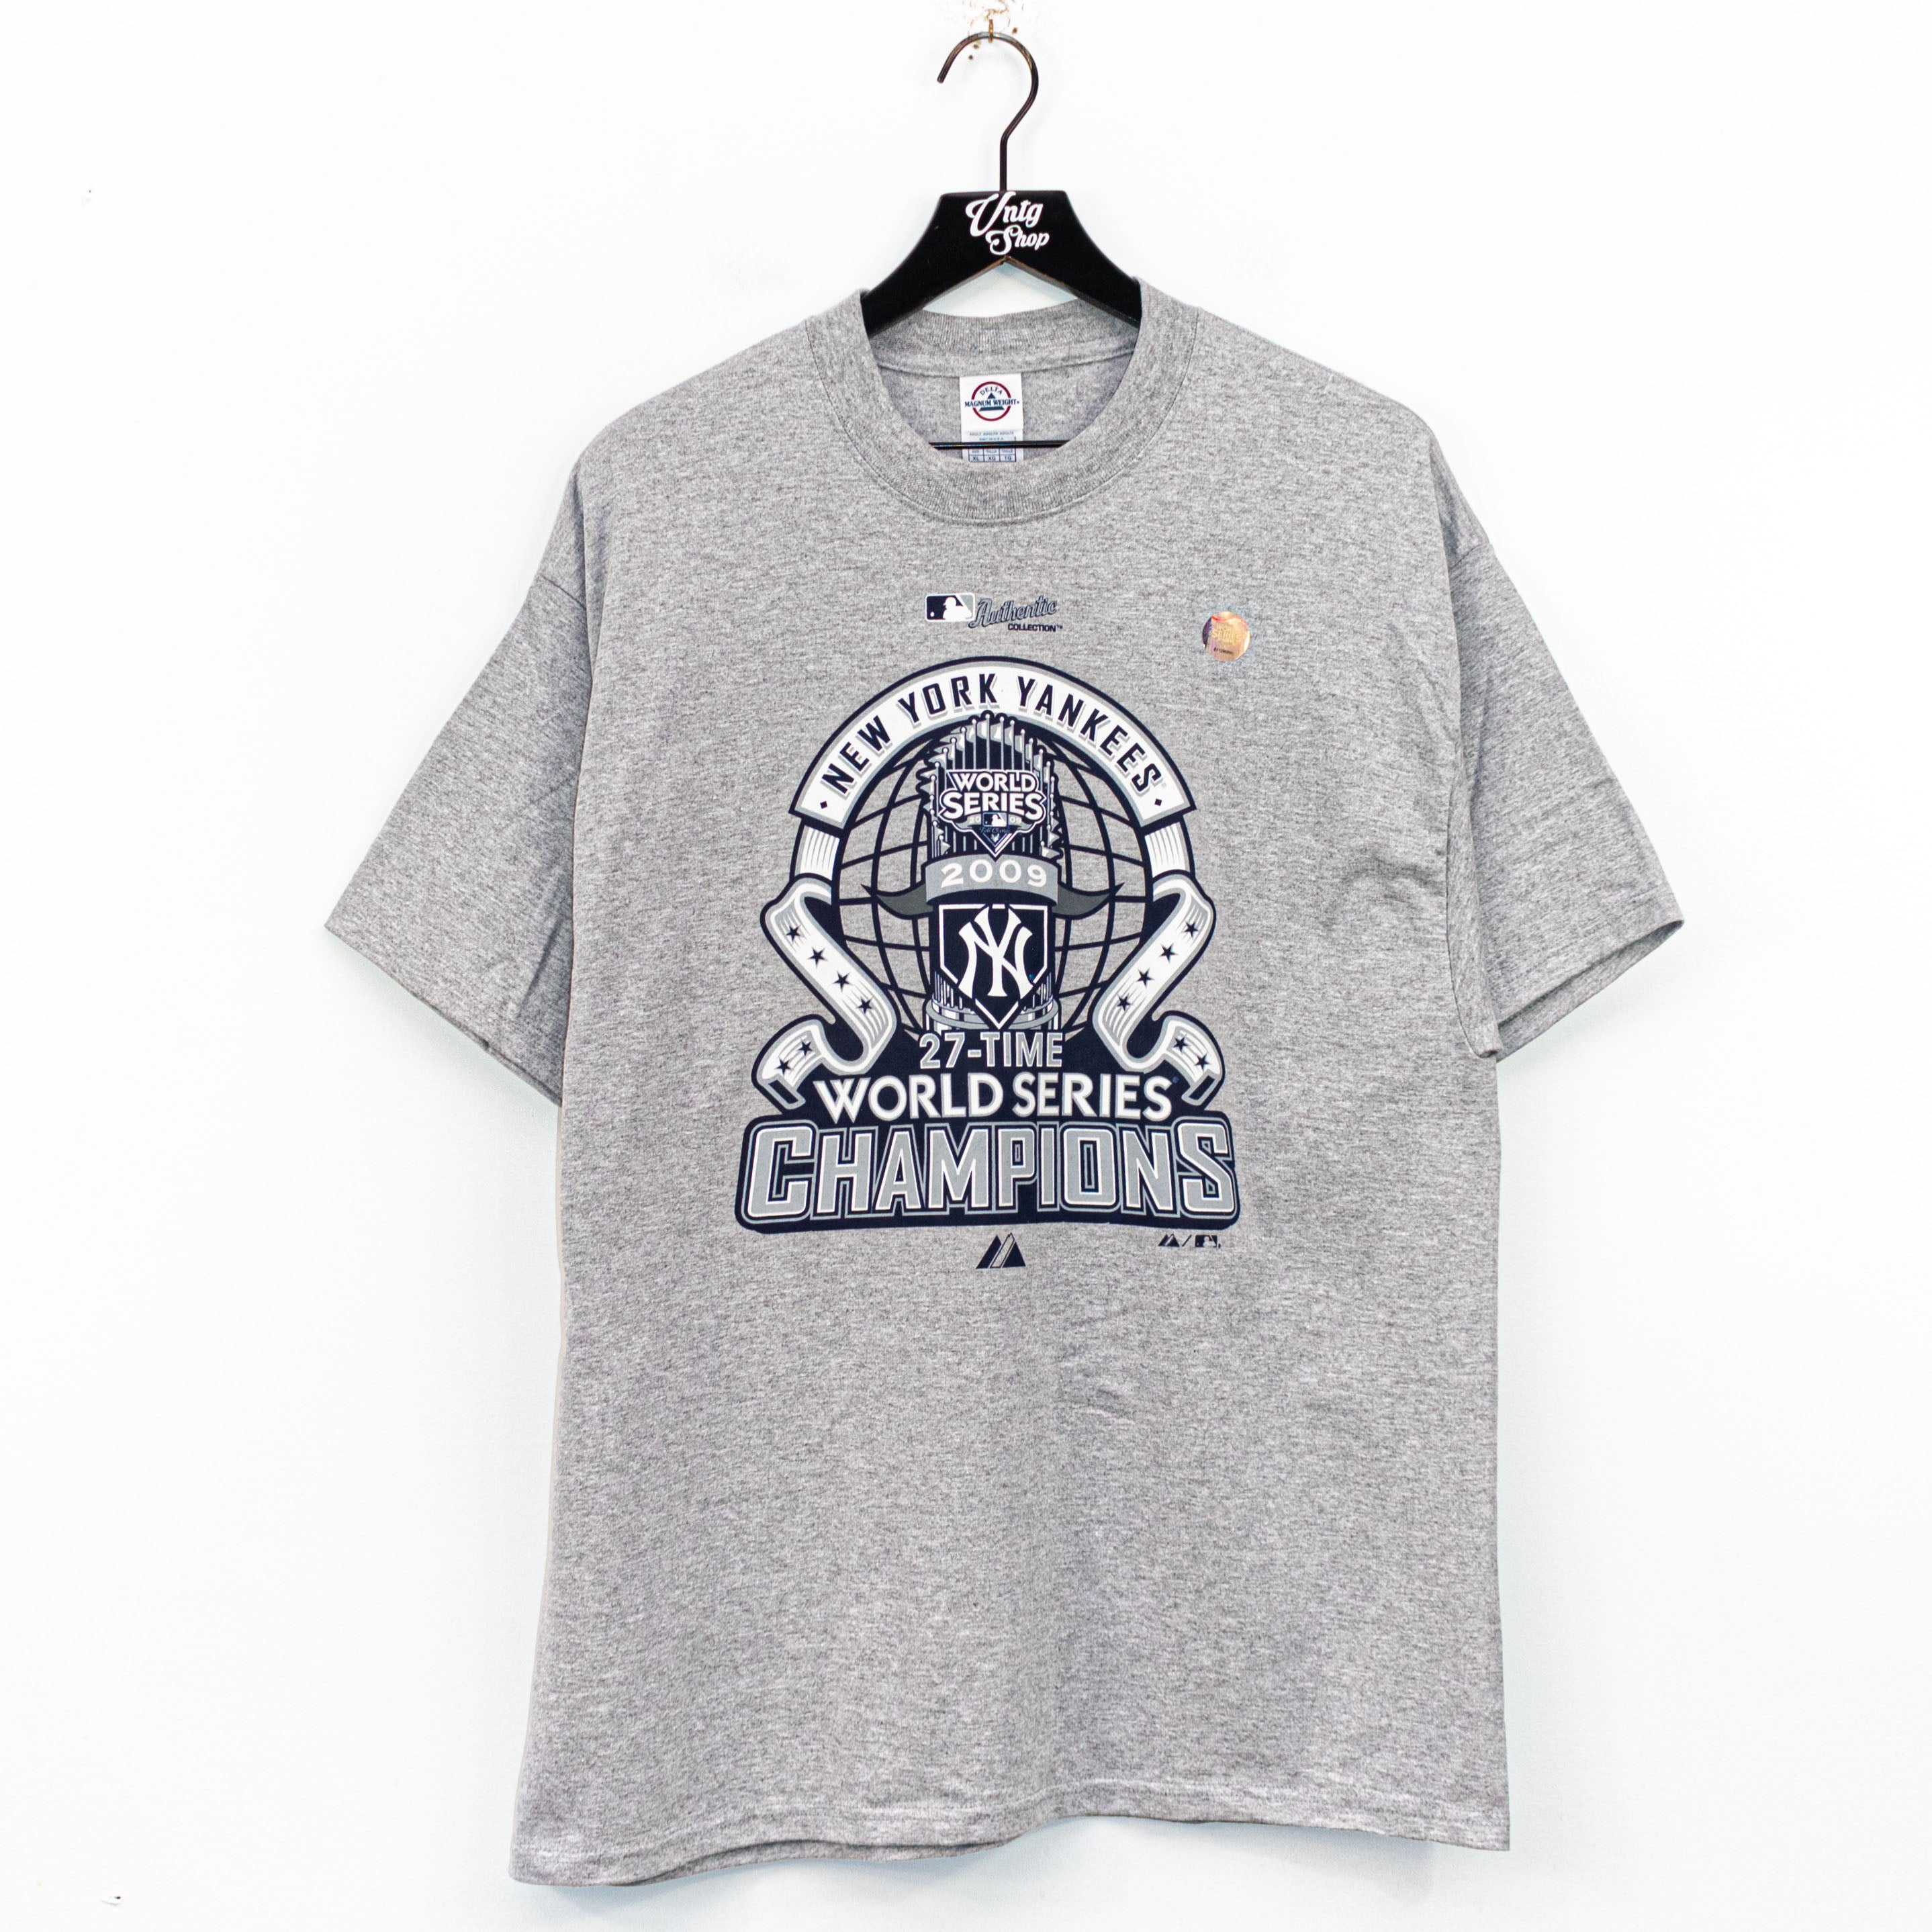 XL Yankees World Series 2009 T-shirt - clothing & accessories - by owner -  apparel sale - craigslist